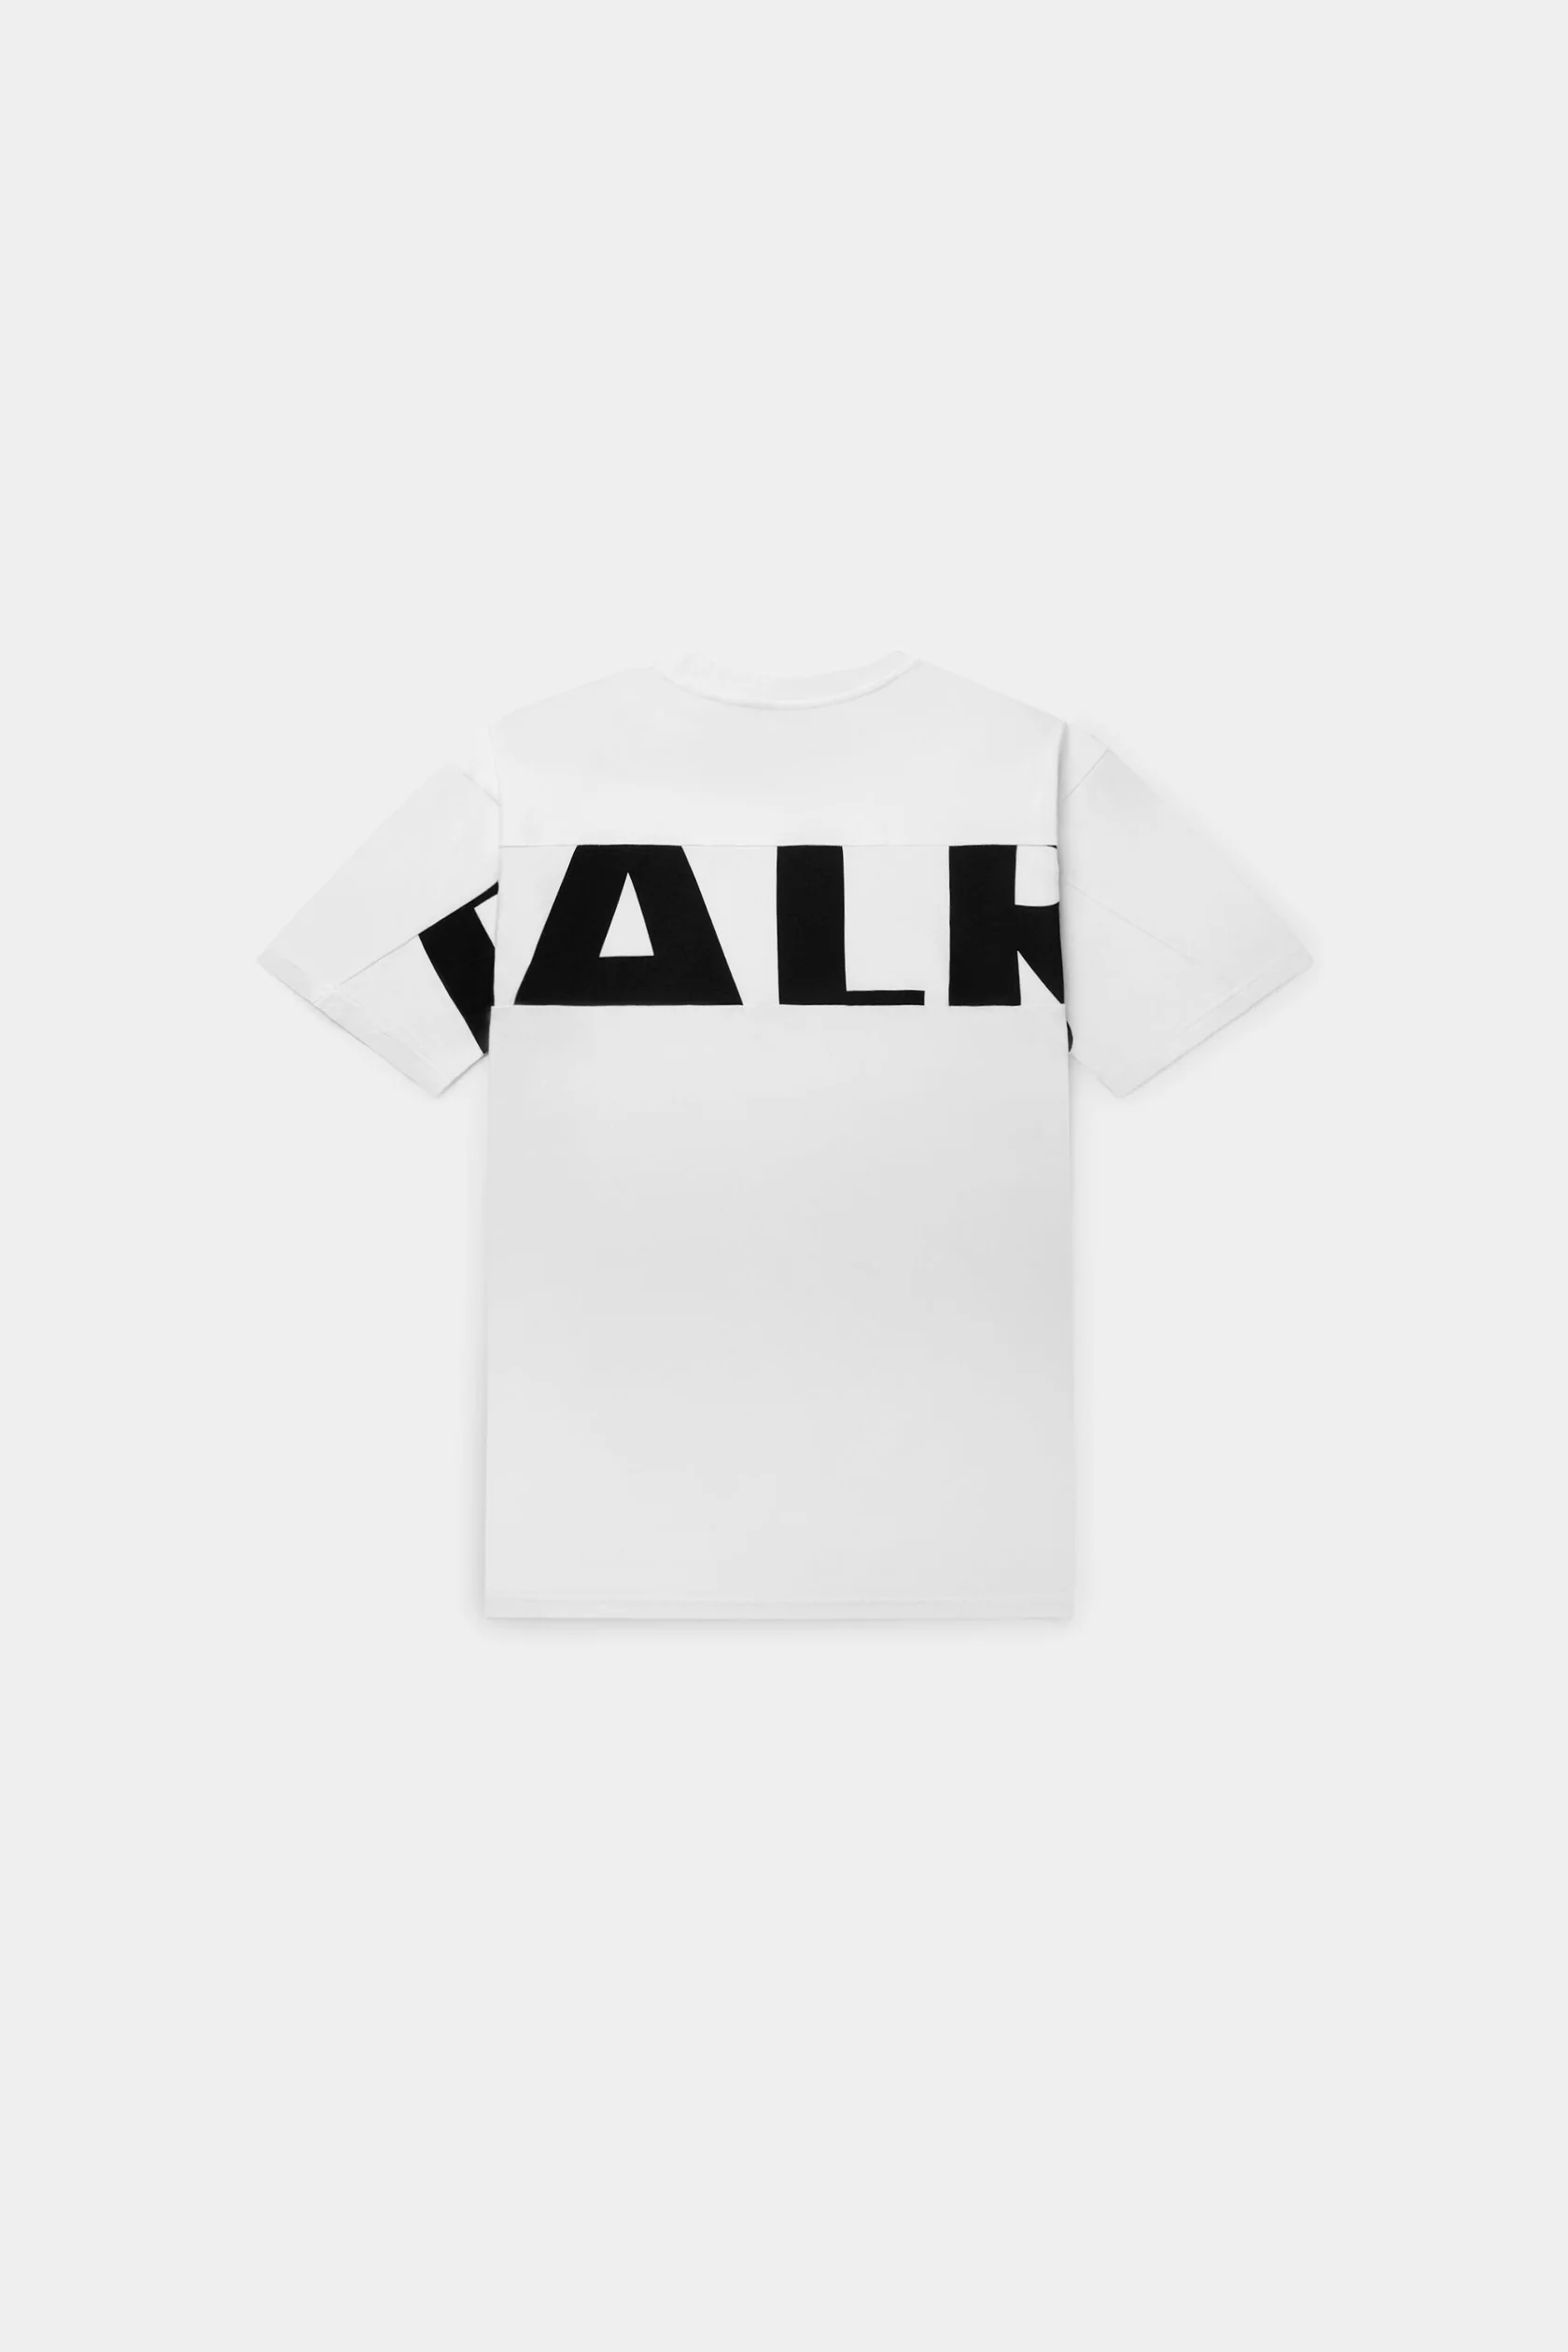 BALR./ボーラー/GAME DAY BOX FIT T-SHIRT(S BRIGHT WHITE)｜ B'2nd ...